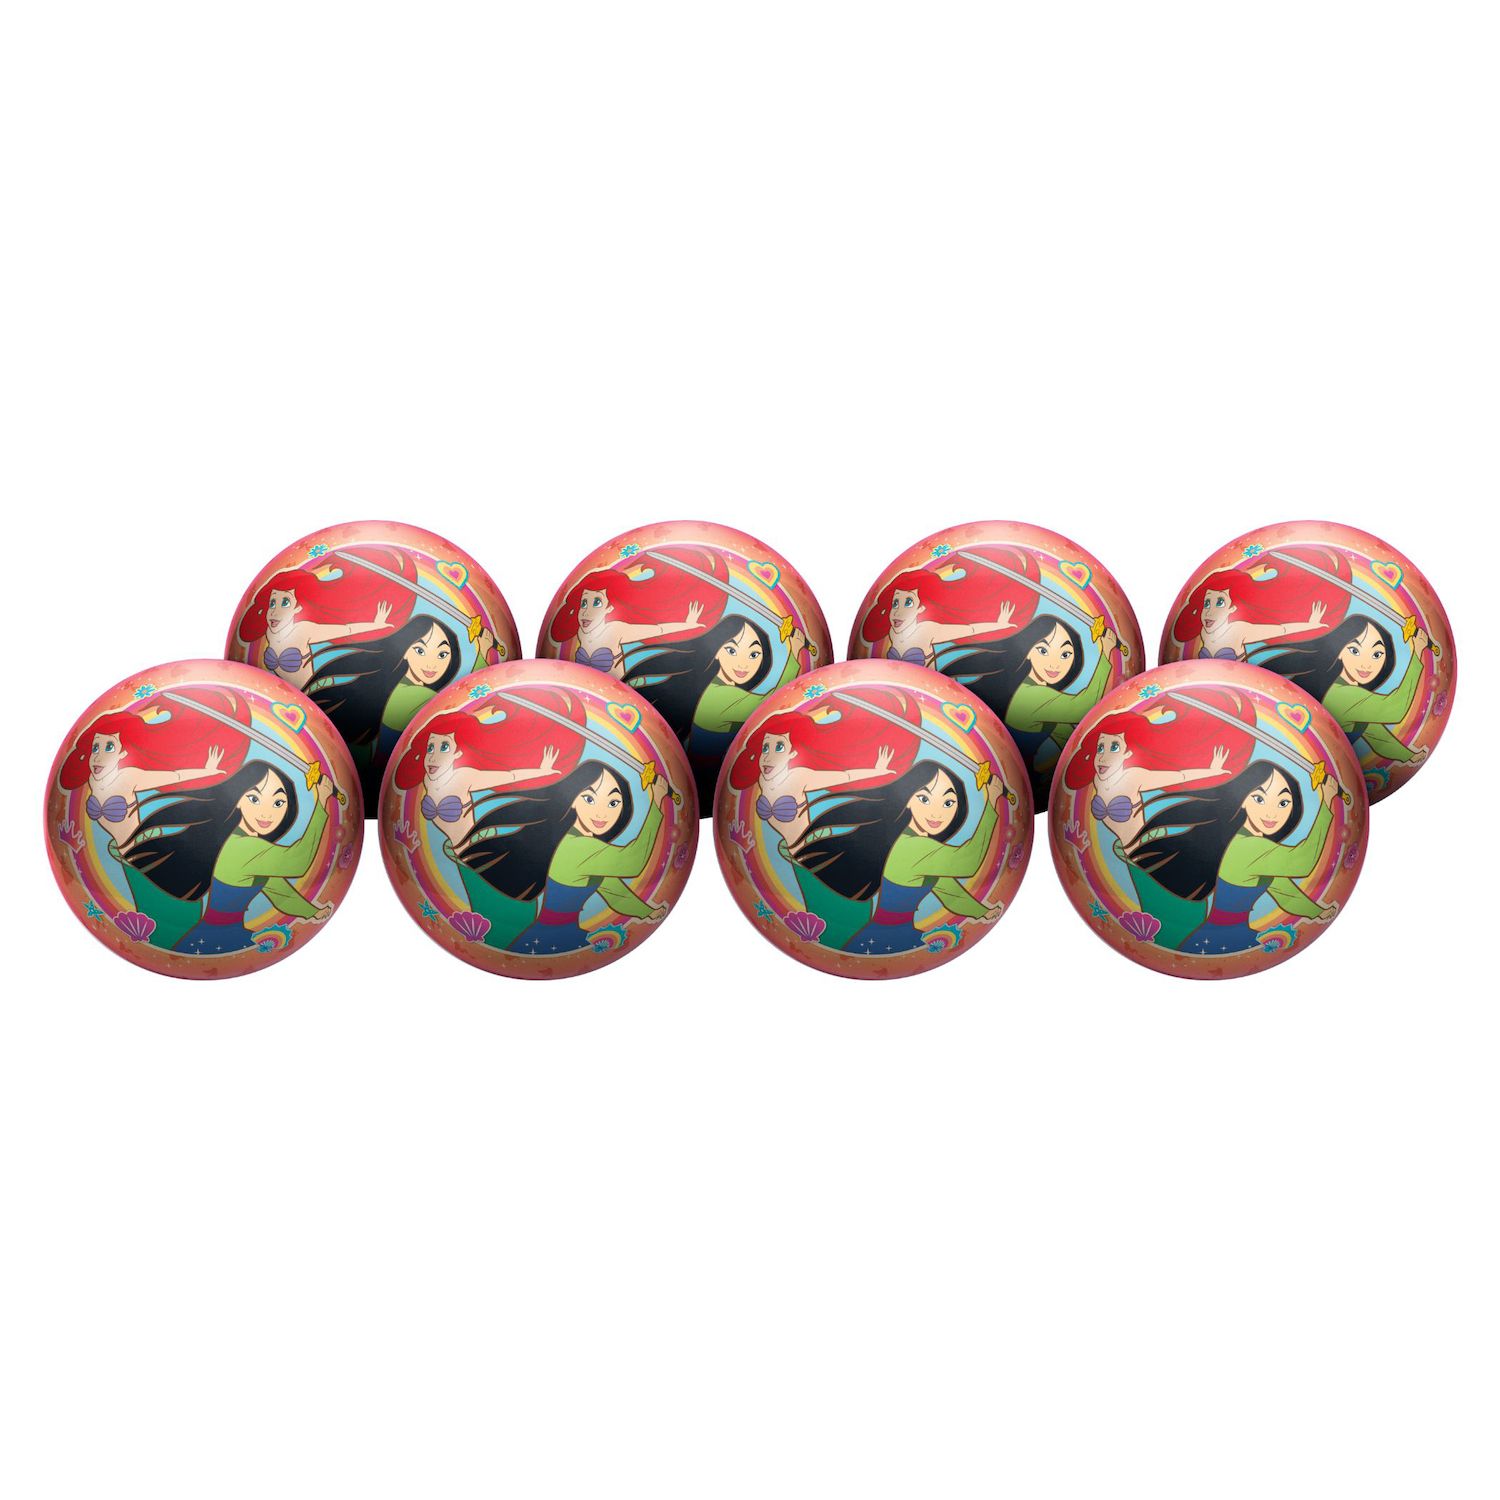 Image for Hedstrom Disney's Mulan 8-Pack Playball Party Pack at Kohl's.